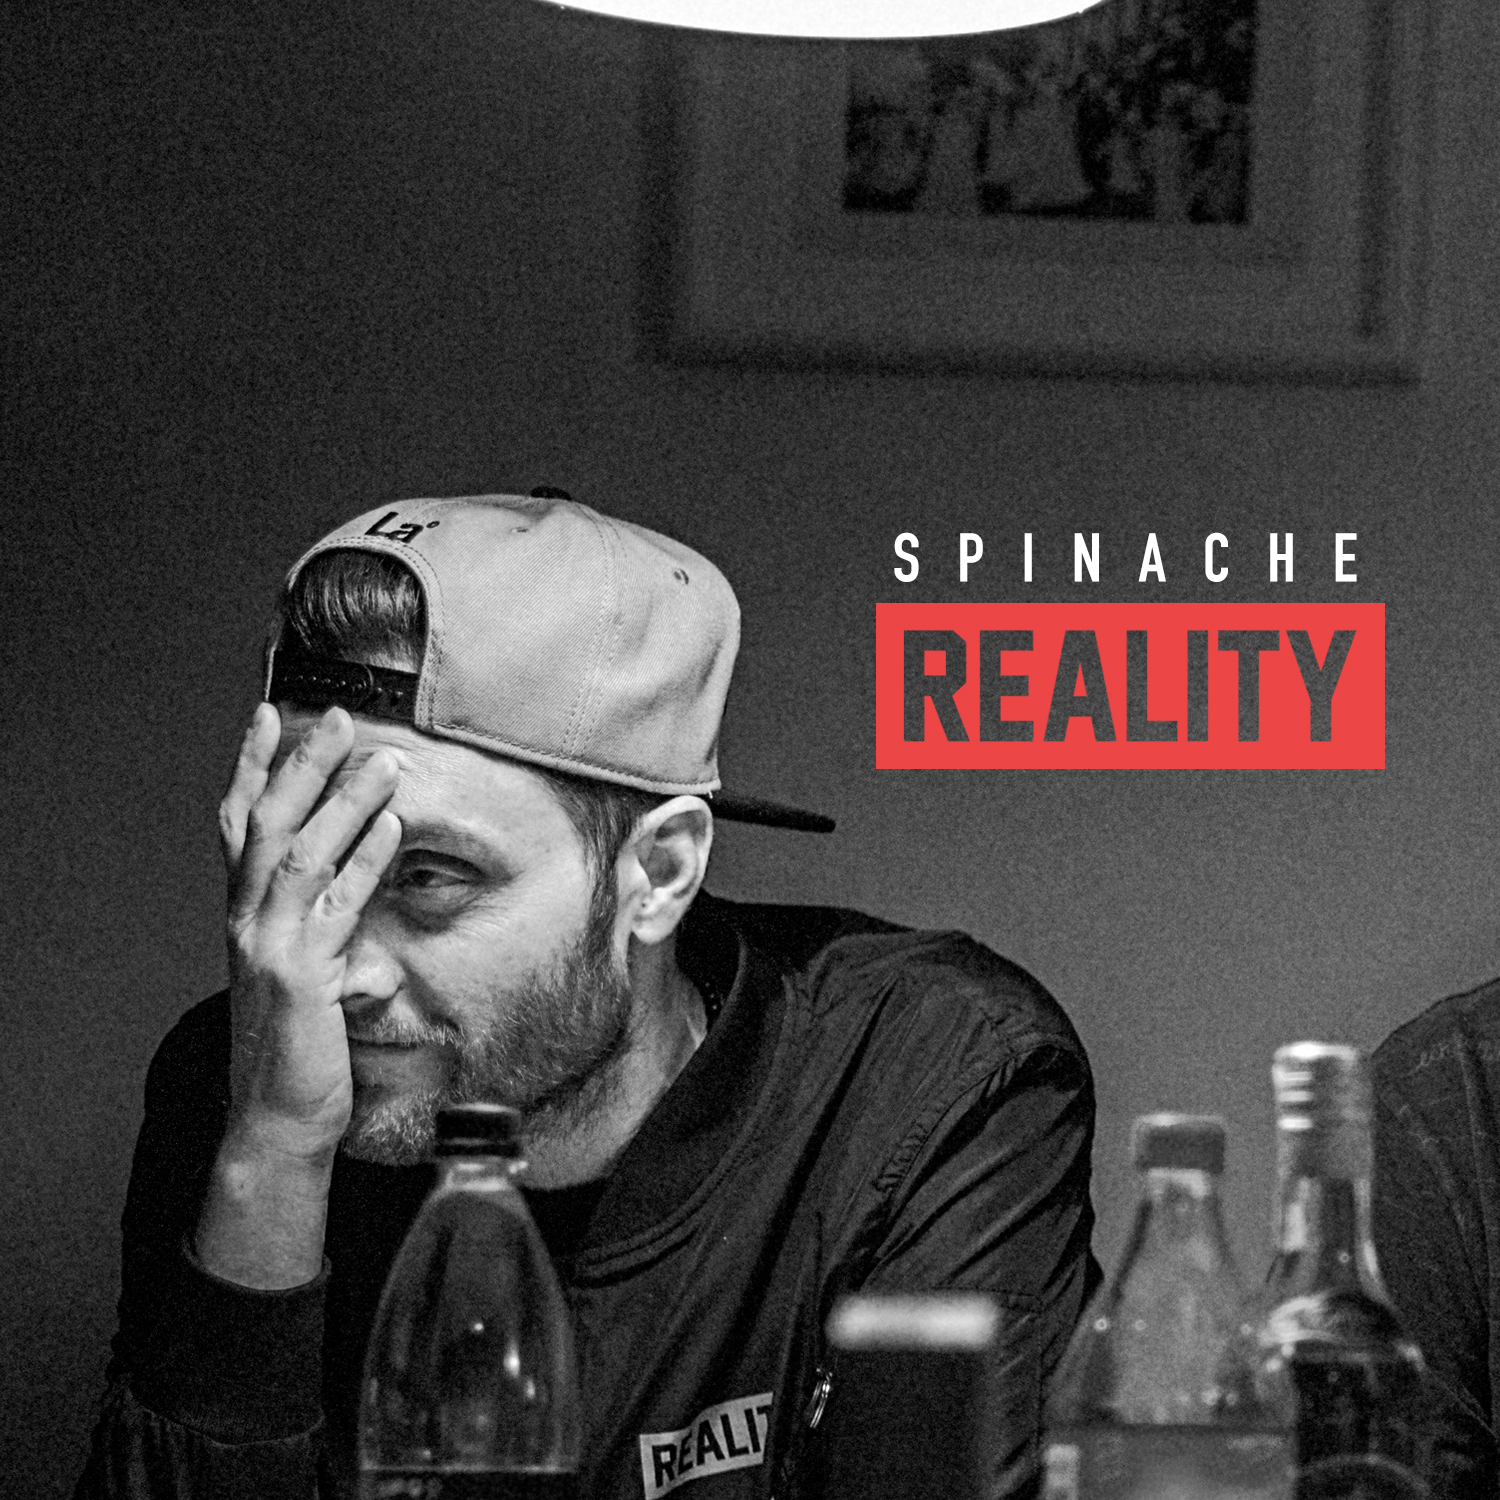 SPINACHE REALITY